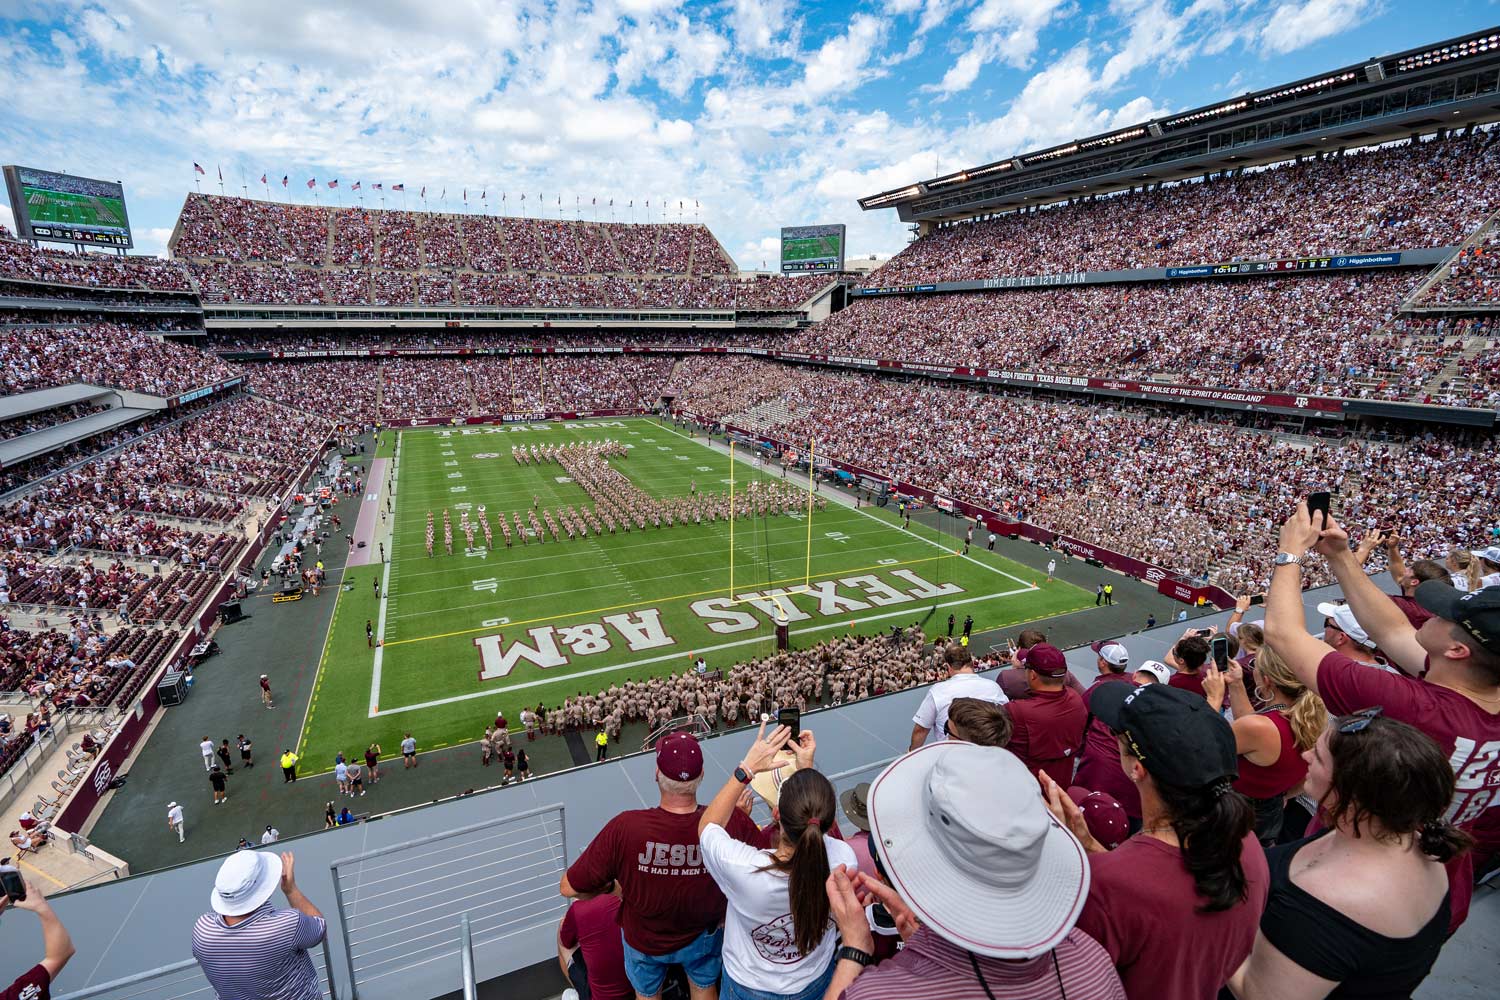 2nd deck view of a completely maroon Kyle Field during a halftime performance